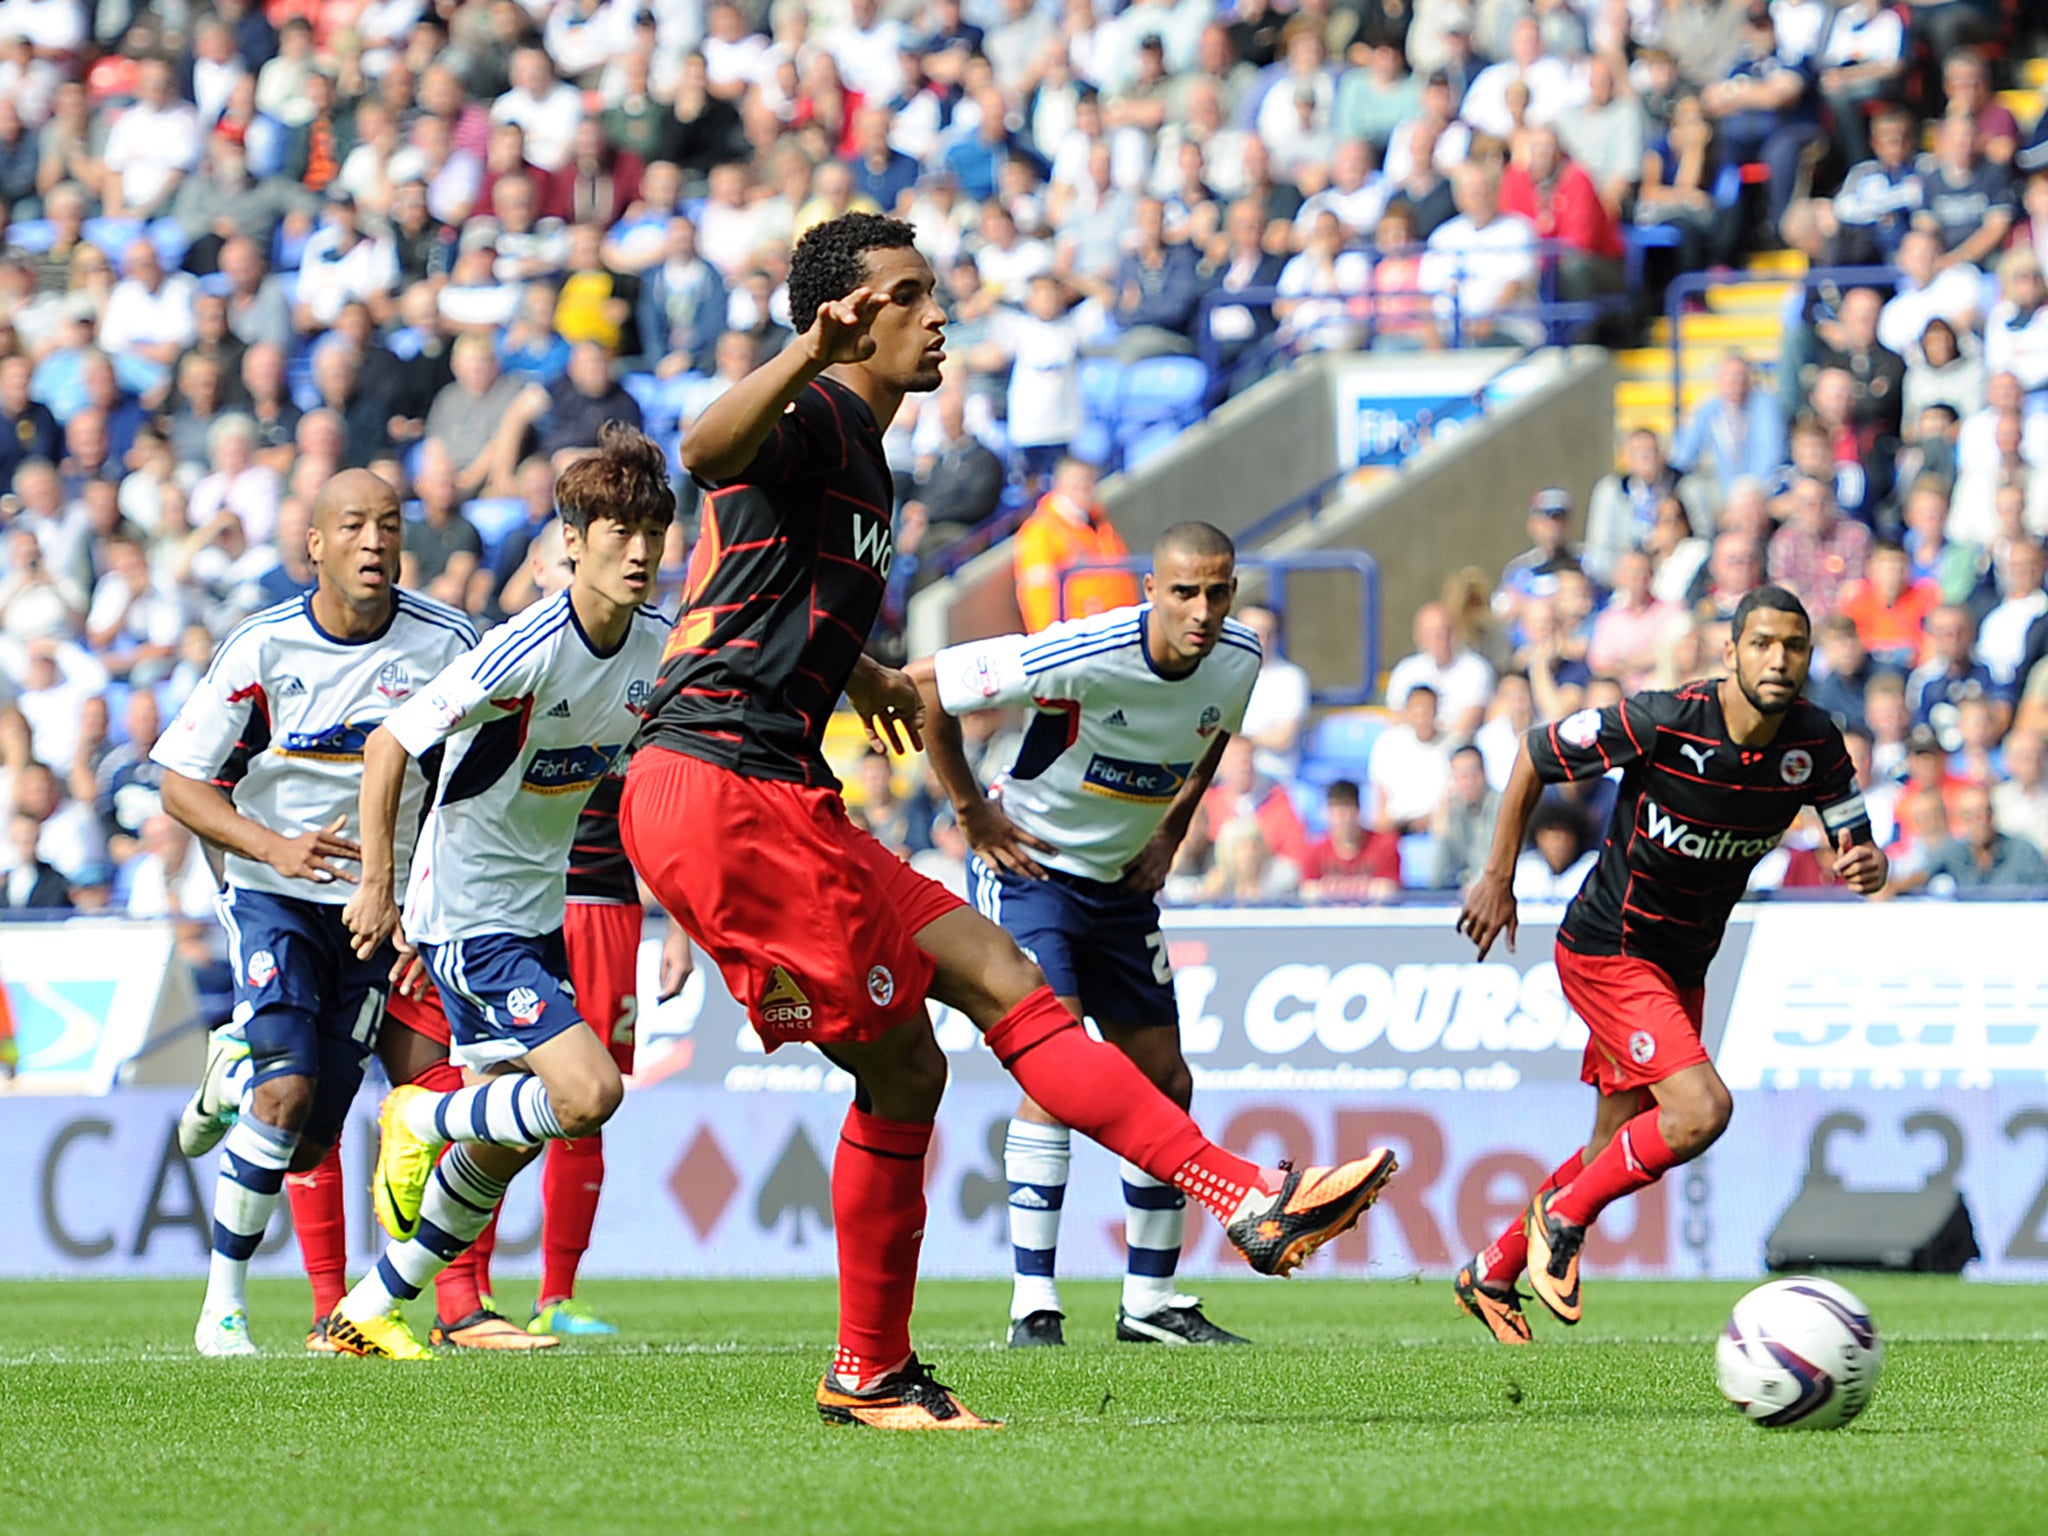 Nick Blackman slots home a penalty to give Reading a share of the points with Bolton